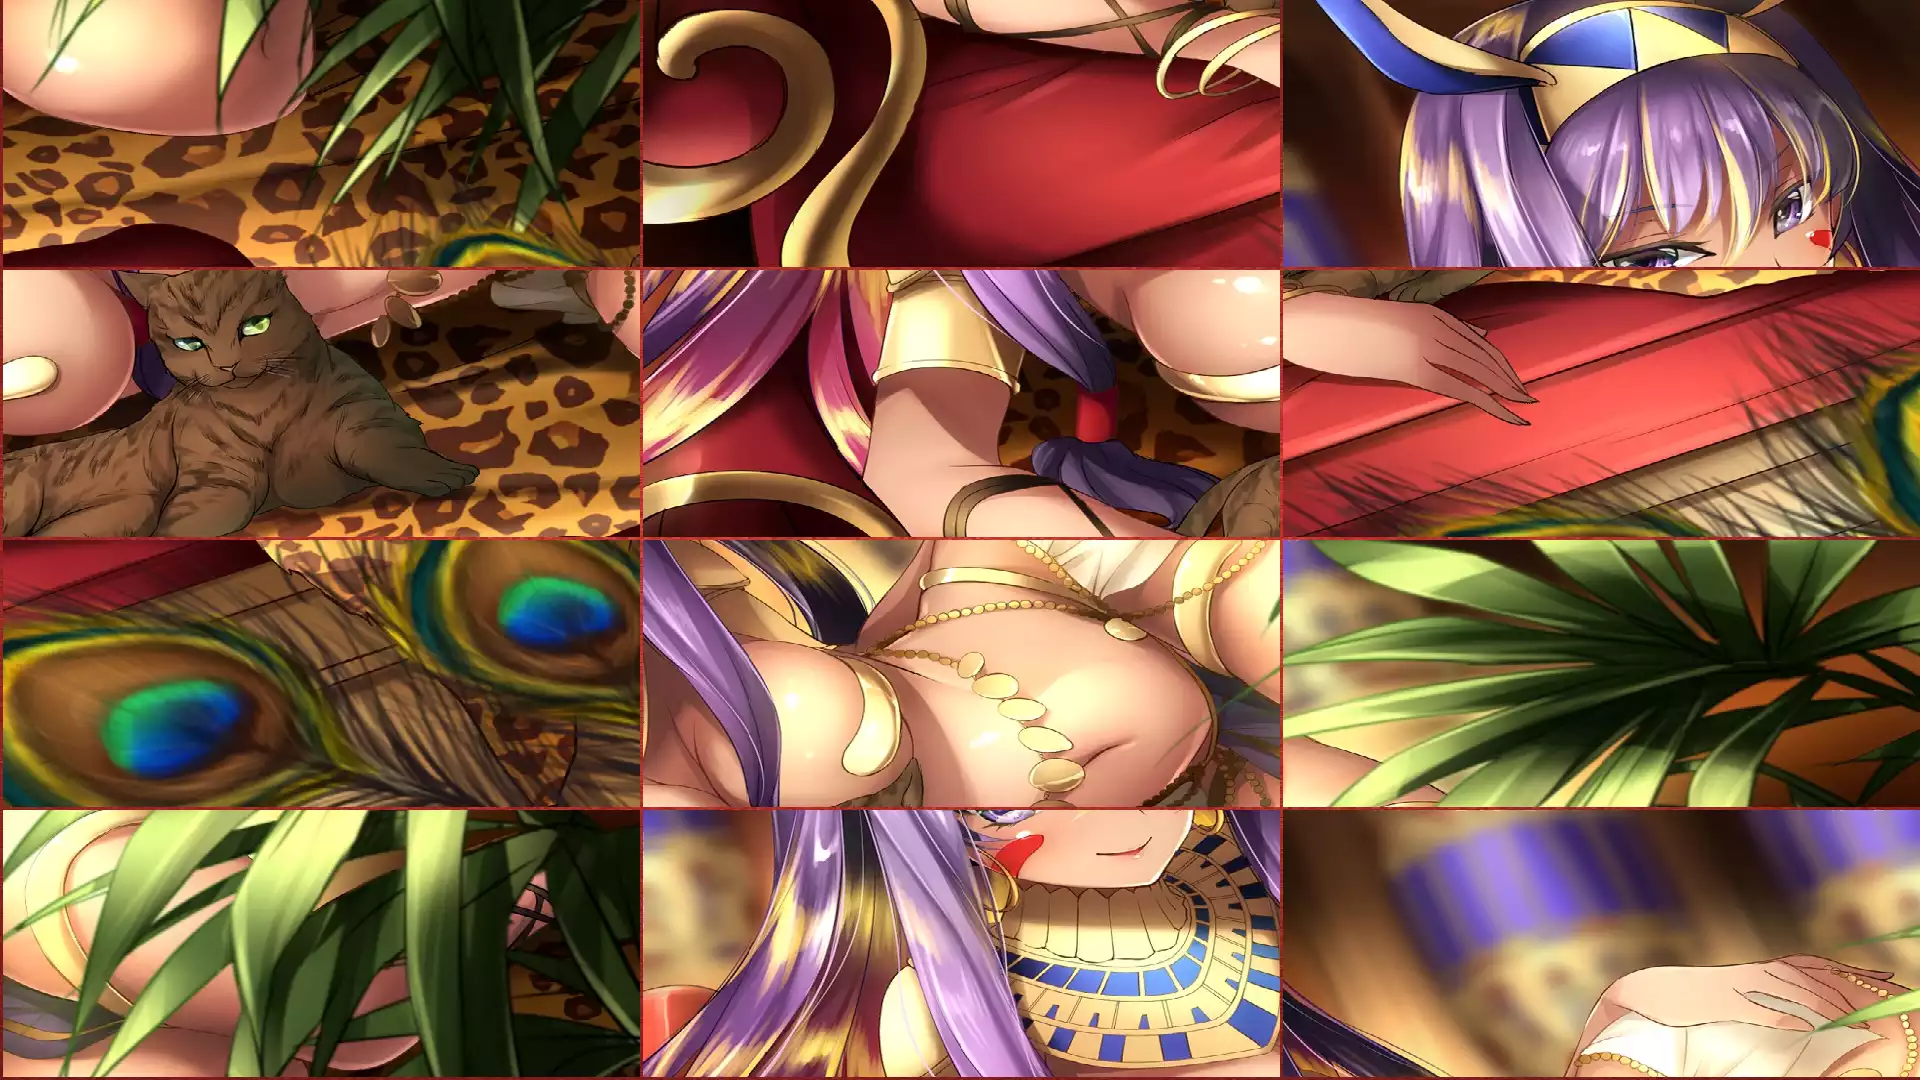 Hot Cats Puzzle picture,best,gallery,immage,pic,manga,hentai,hentie,pictures,henati,puzzle,sexy,and,pics,photo,puzzles,hintai,porn,futanari,apk,mod,panties,android,girl,games